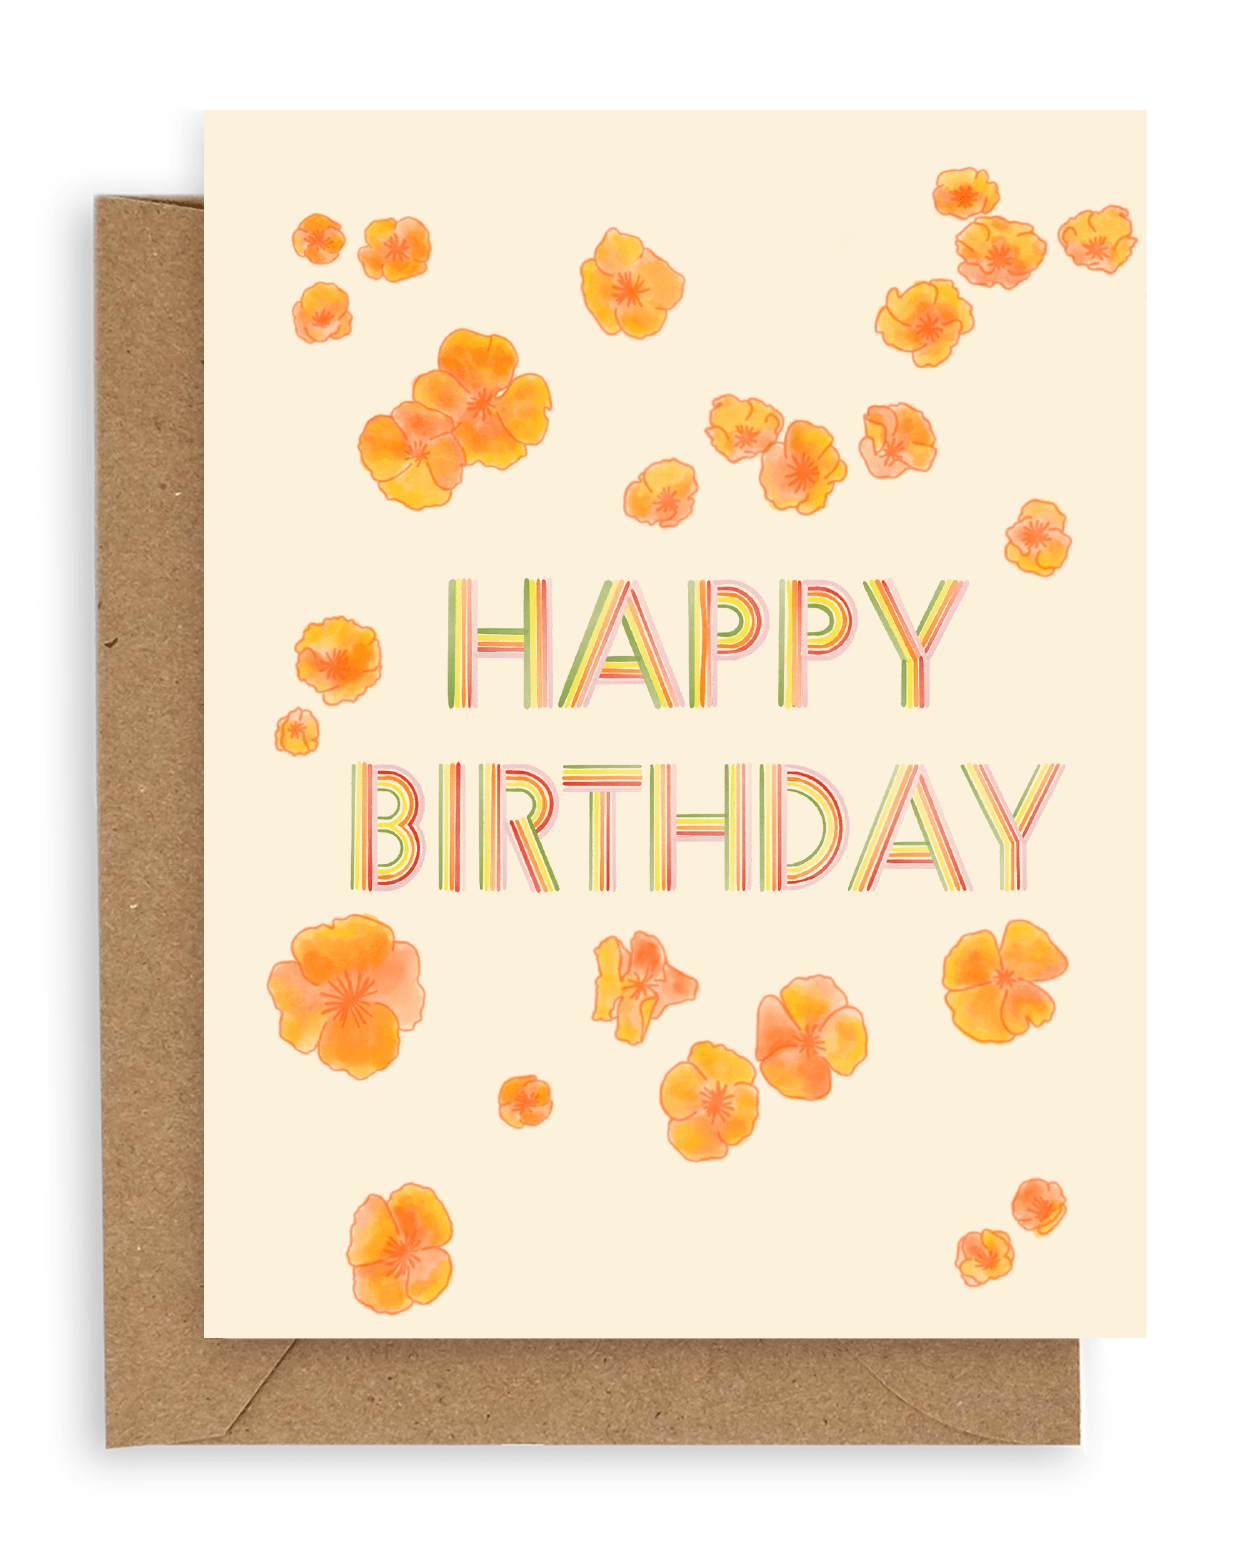 Orange California poppies surround the words &quot;happy birthday&quot; in multicolor printed on a cream background. Shown with kraft envelope.